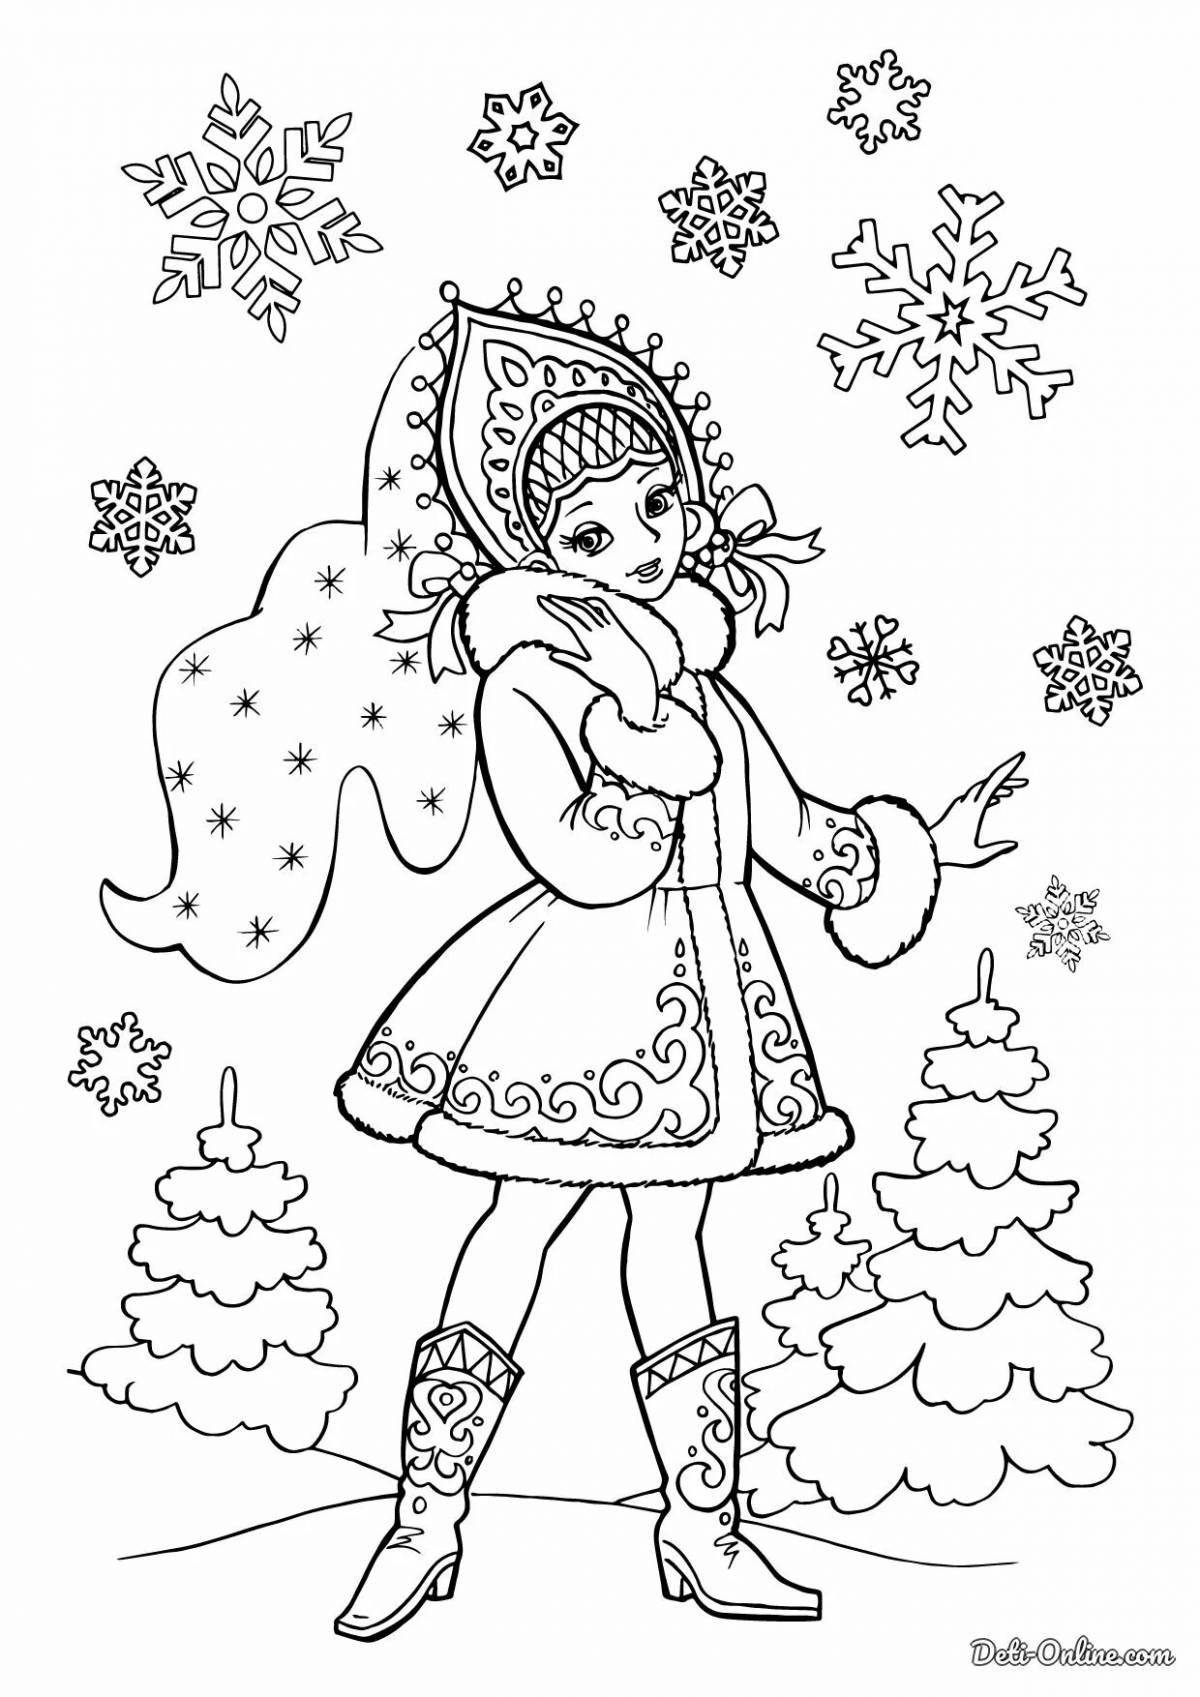 Bright Christmas coloring book for a 10 year old girl